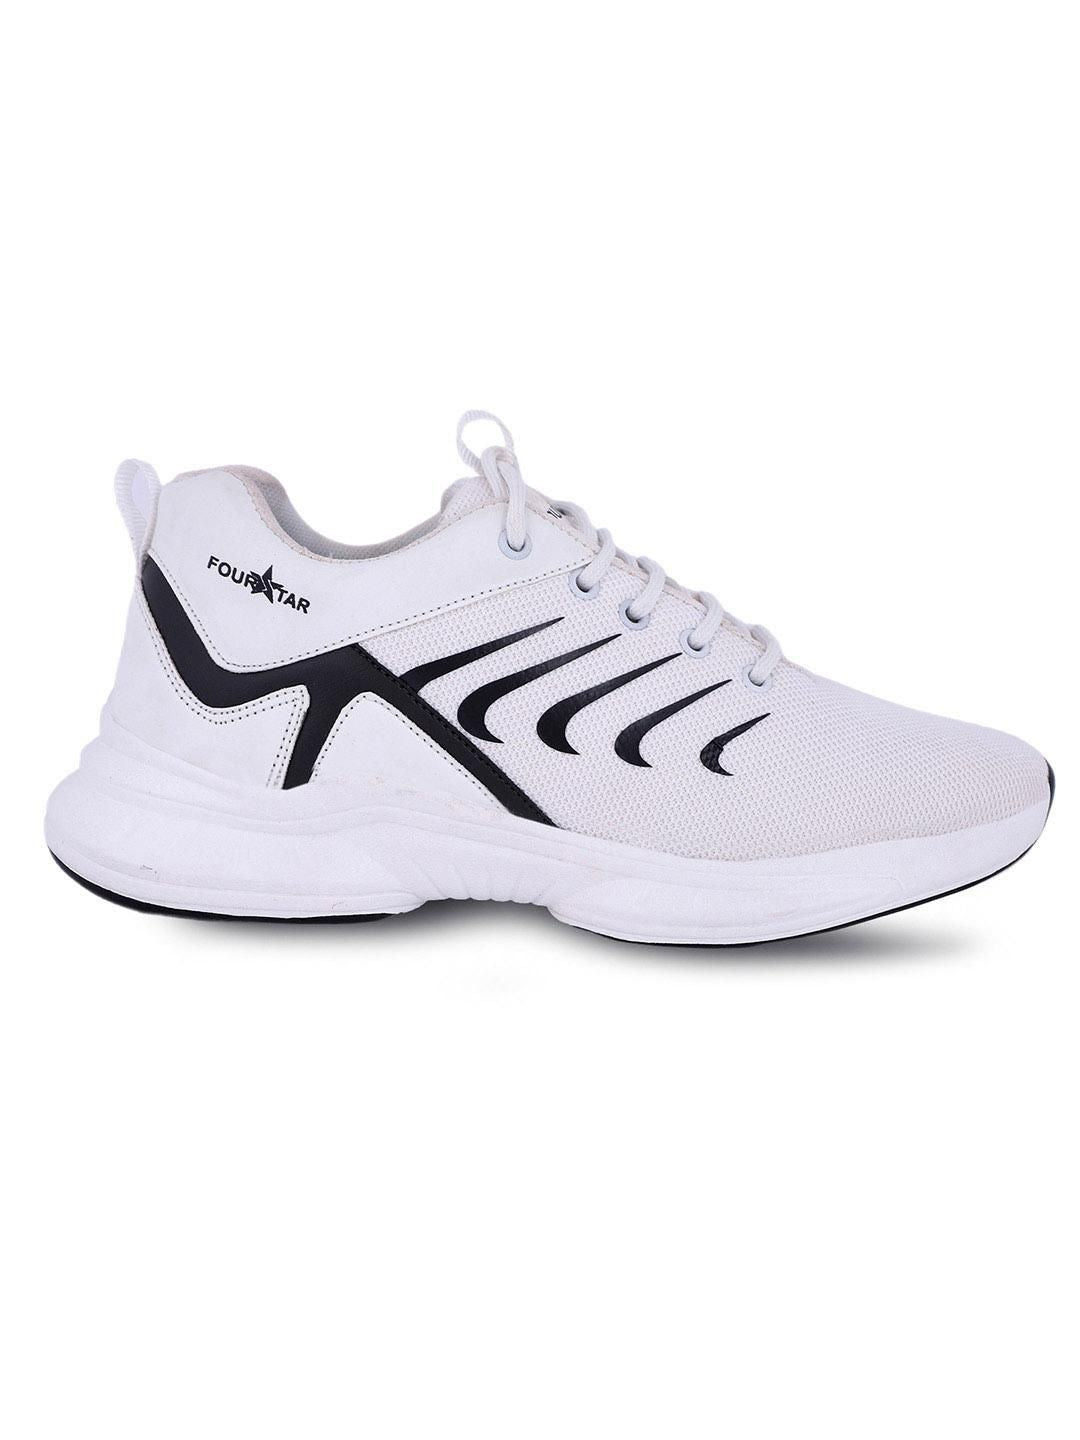 Sporty Men White Lace-up Sport Shoes by Rvy